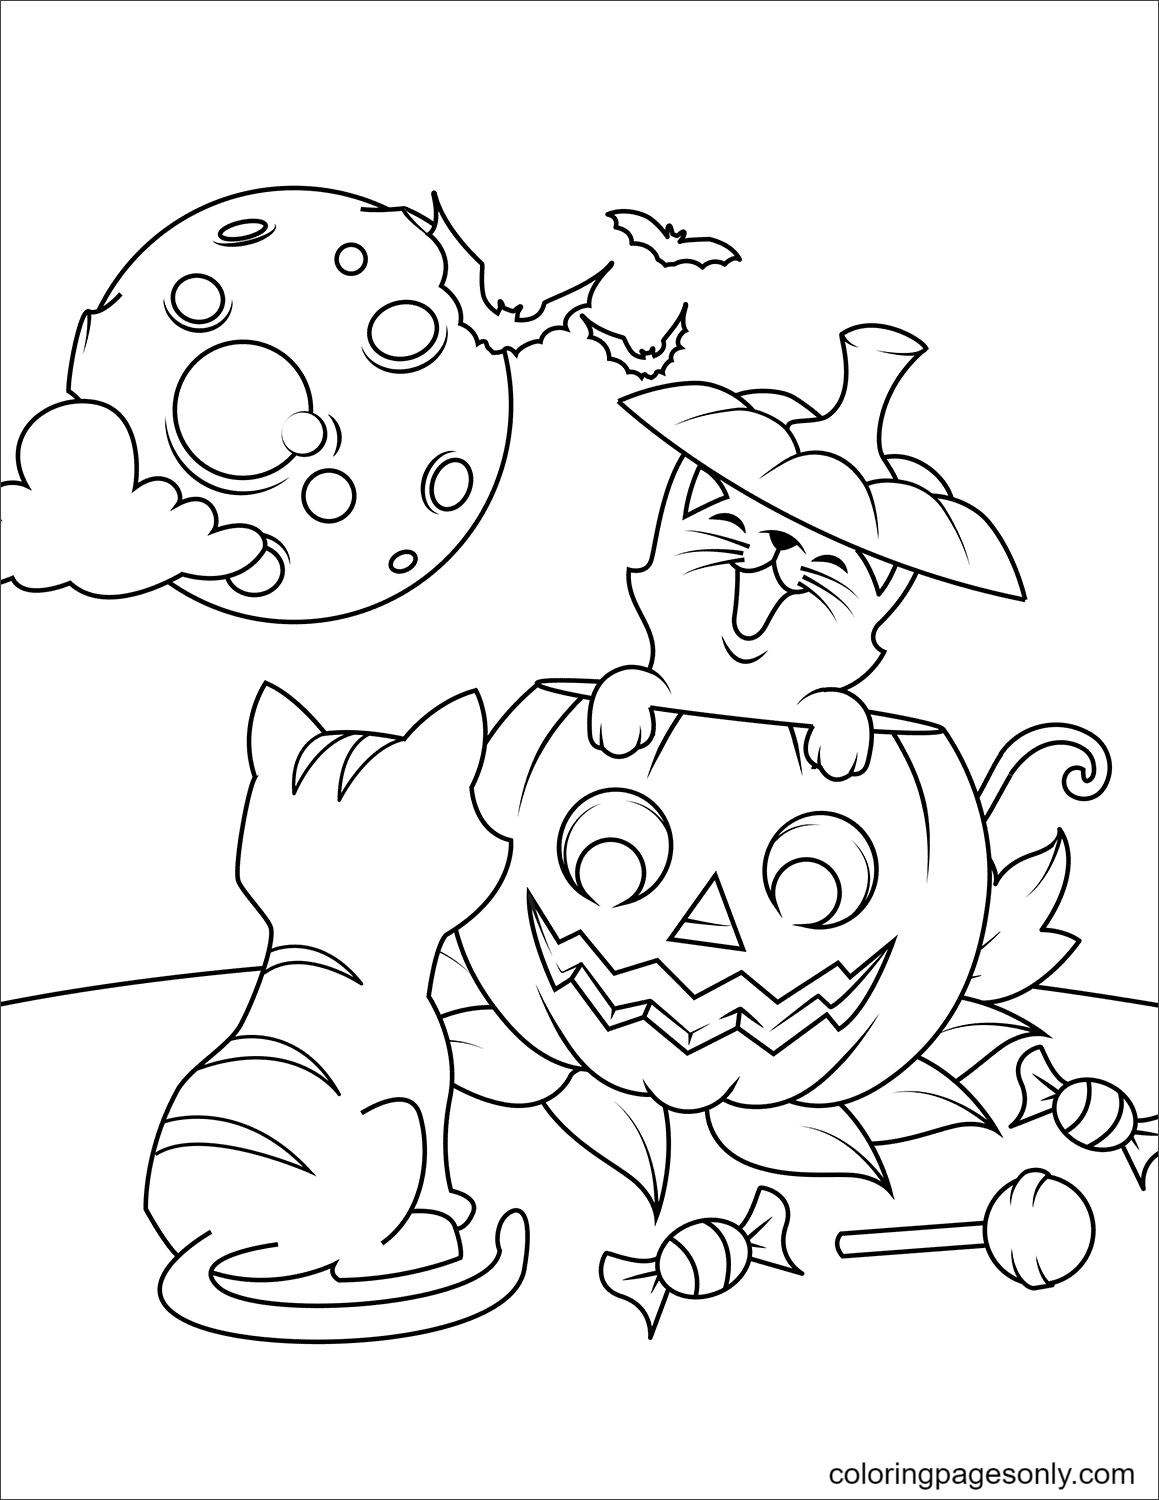 Halloween Cats and Jack O’Lantern Coloring Pages